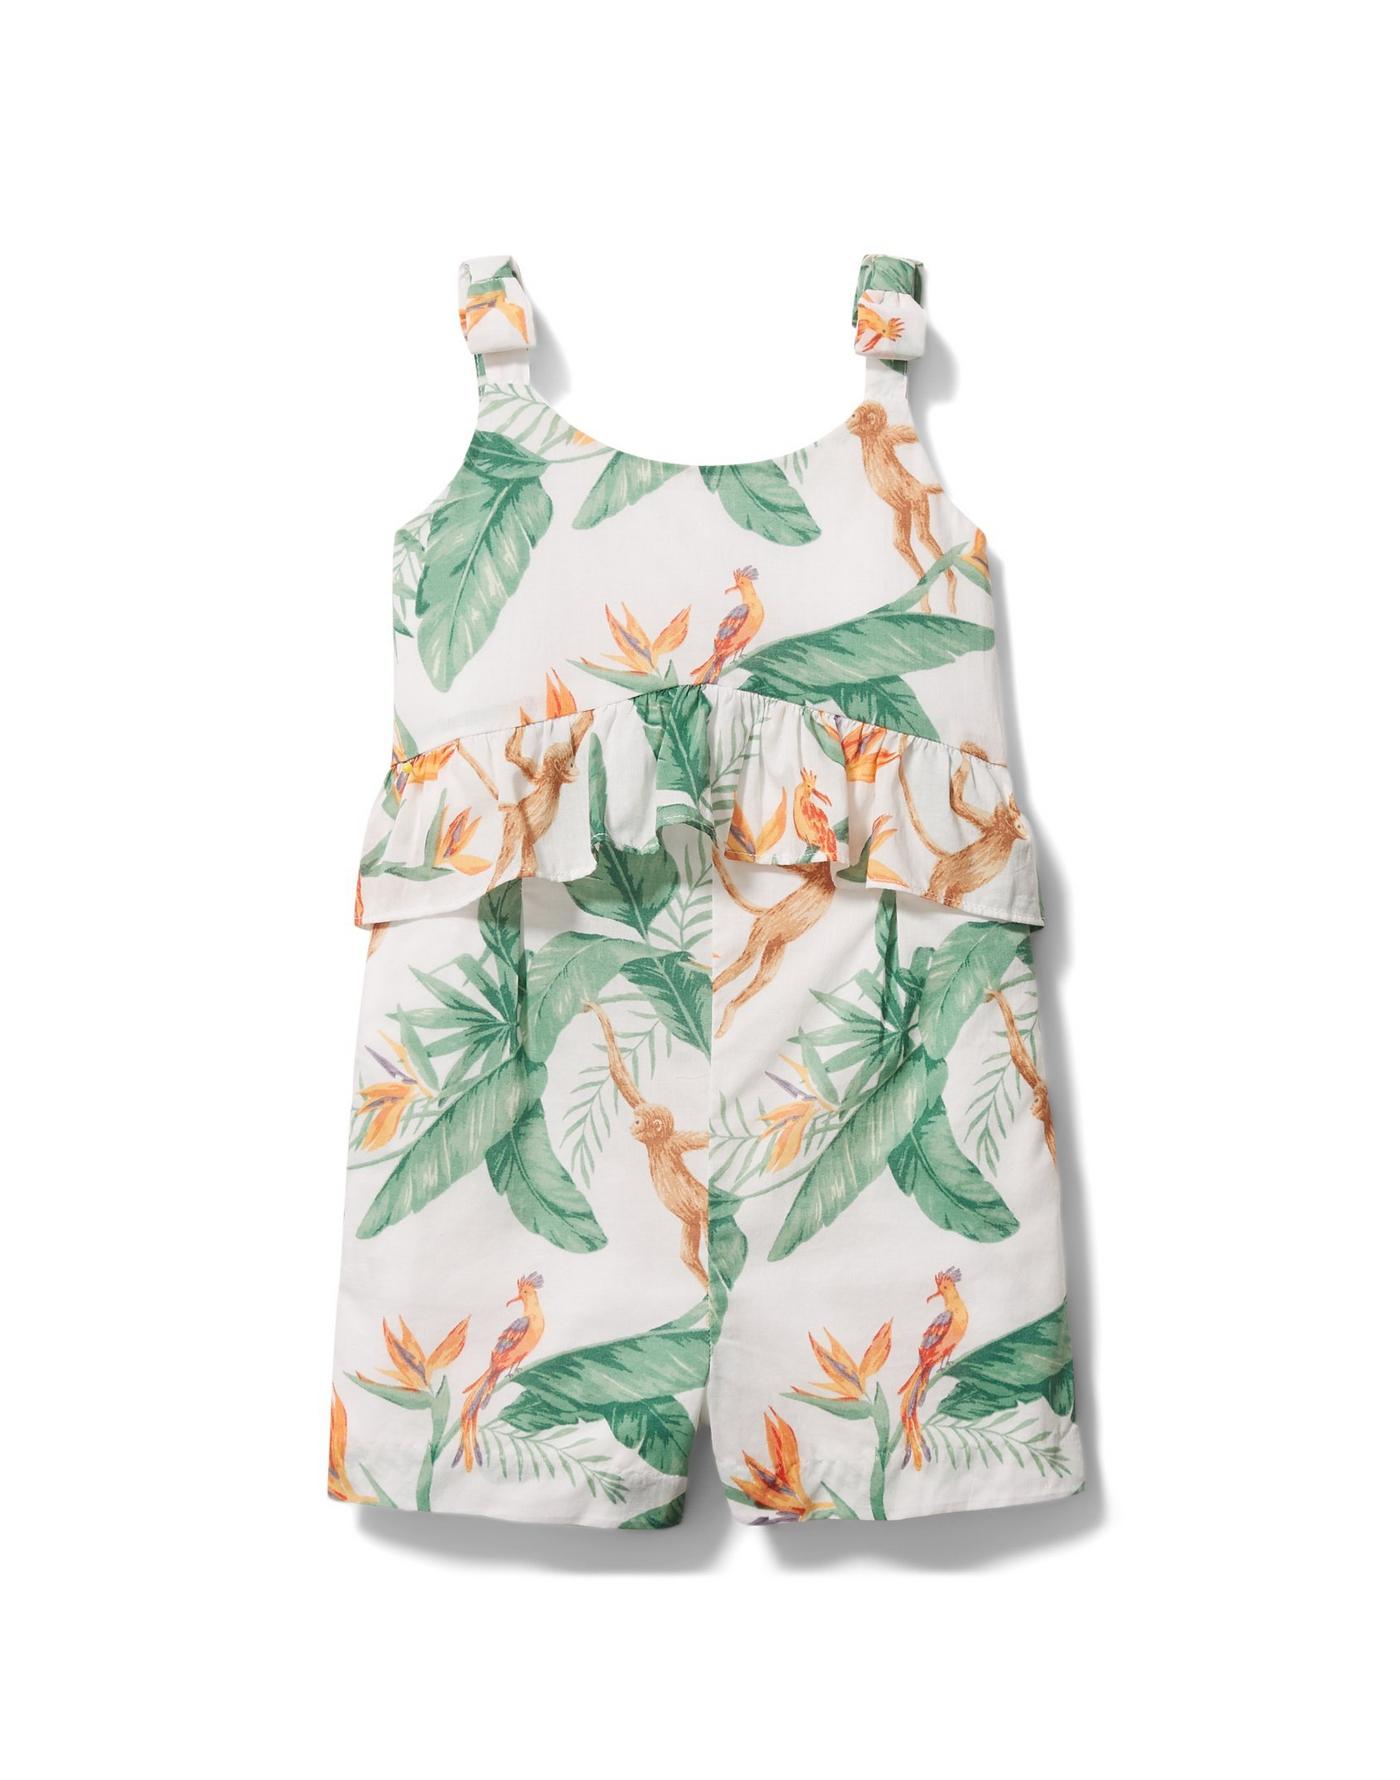 sibling matches for summer, tropical romper